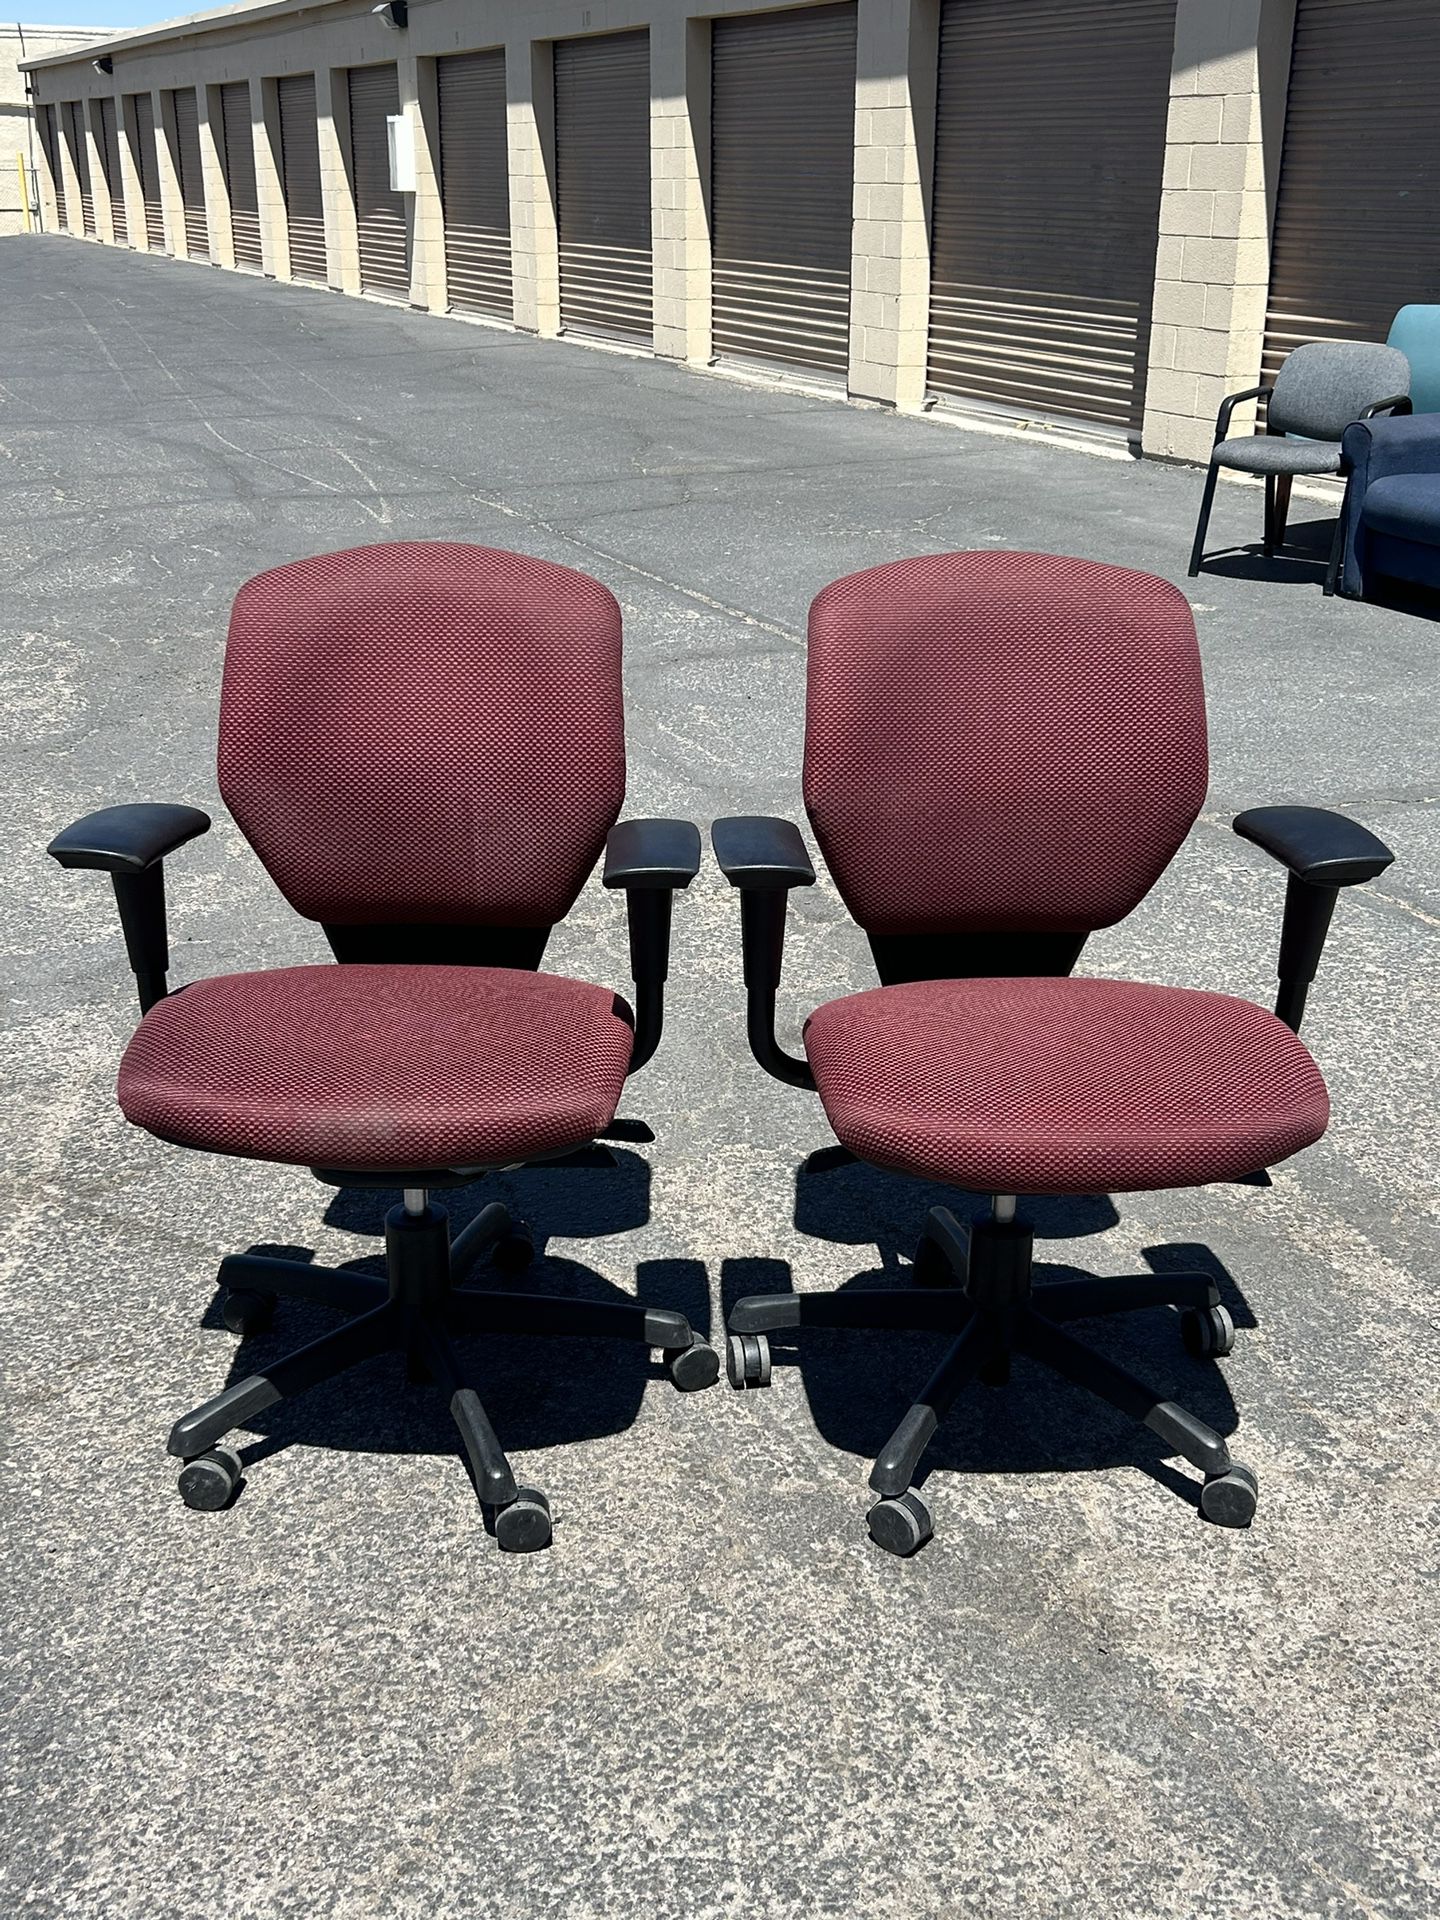 2 Nice HON Office Chairs With Wheels- $25 Each 